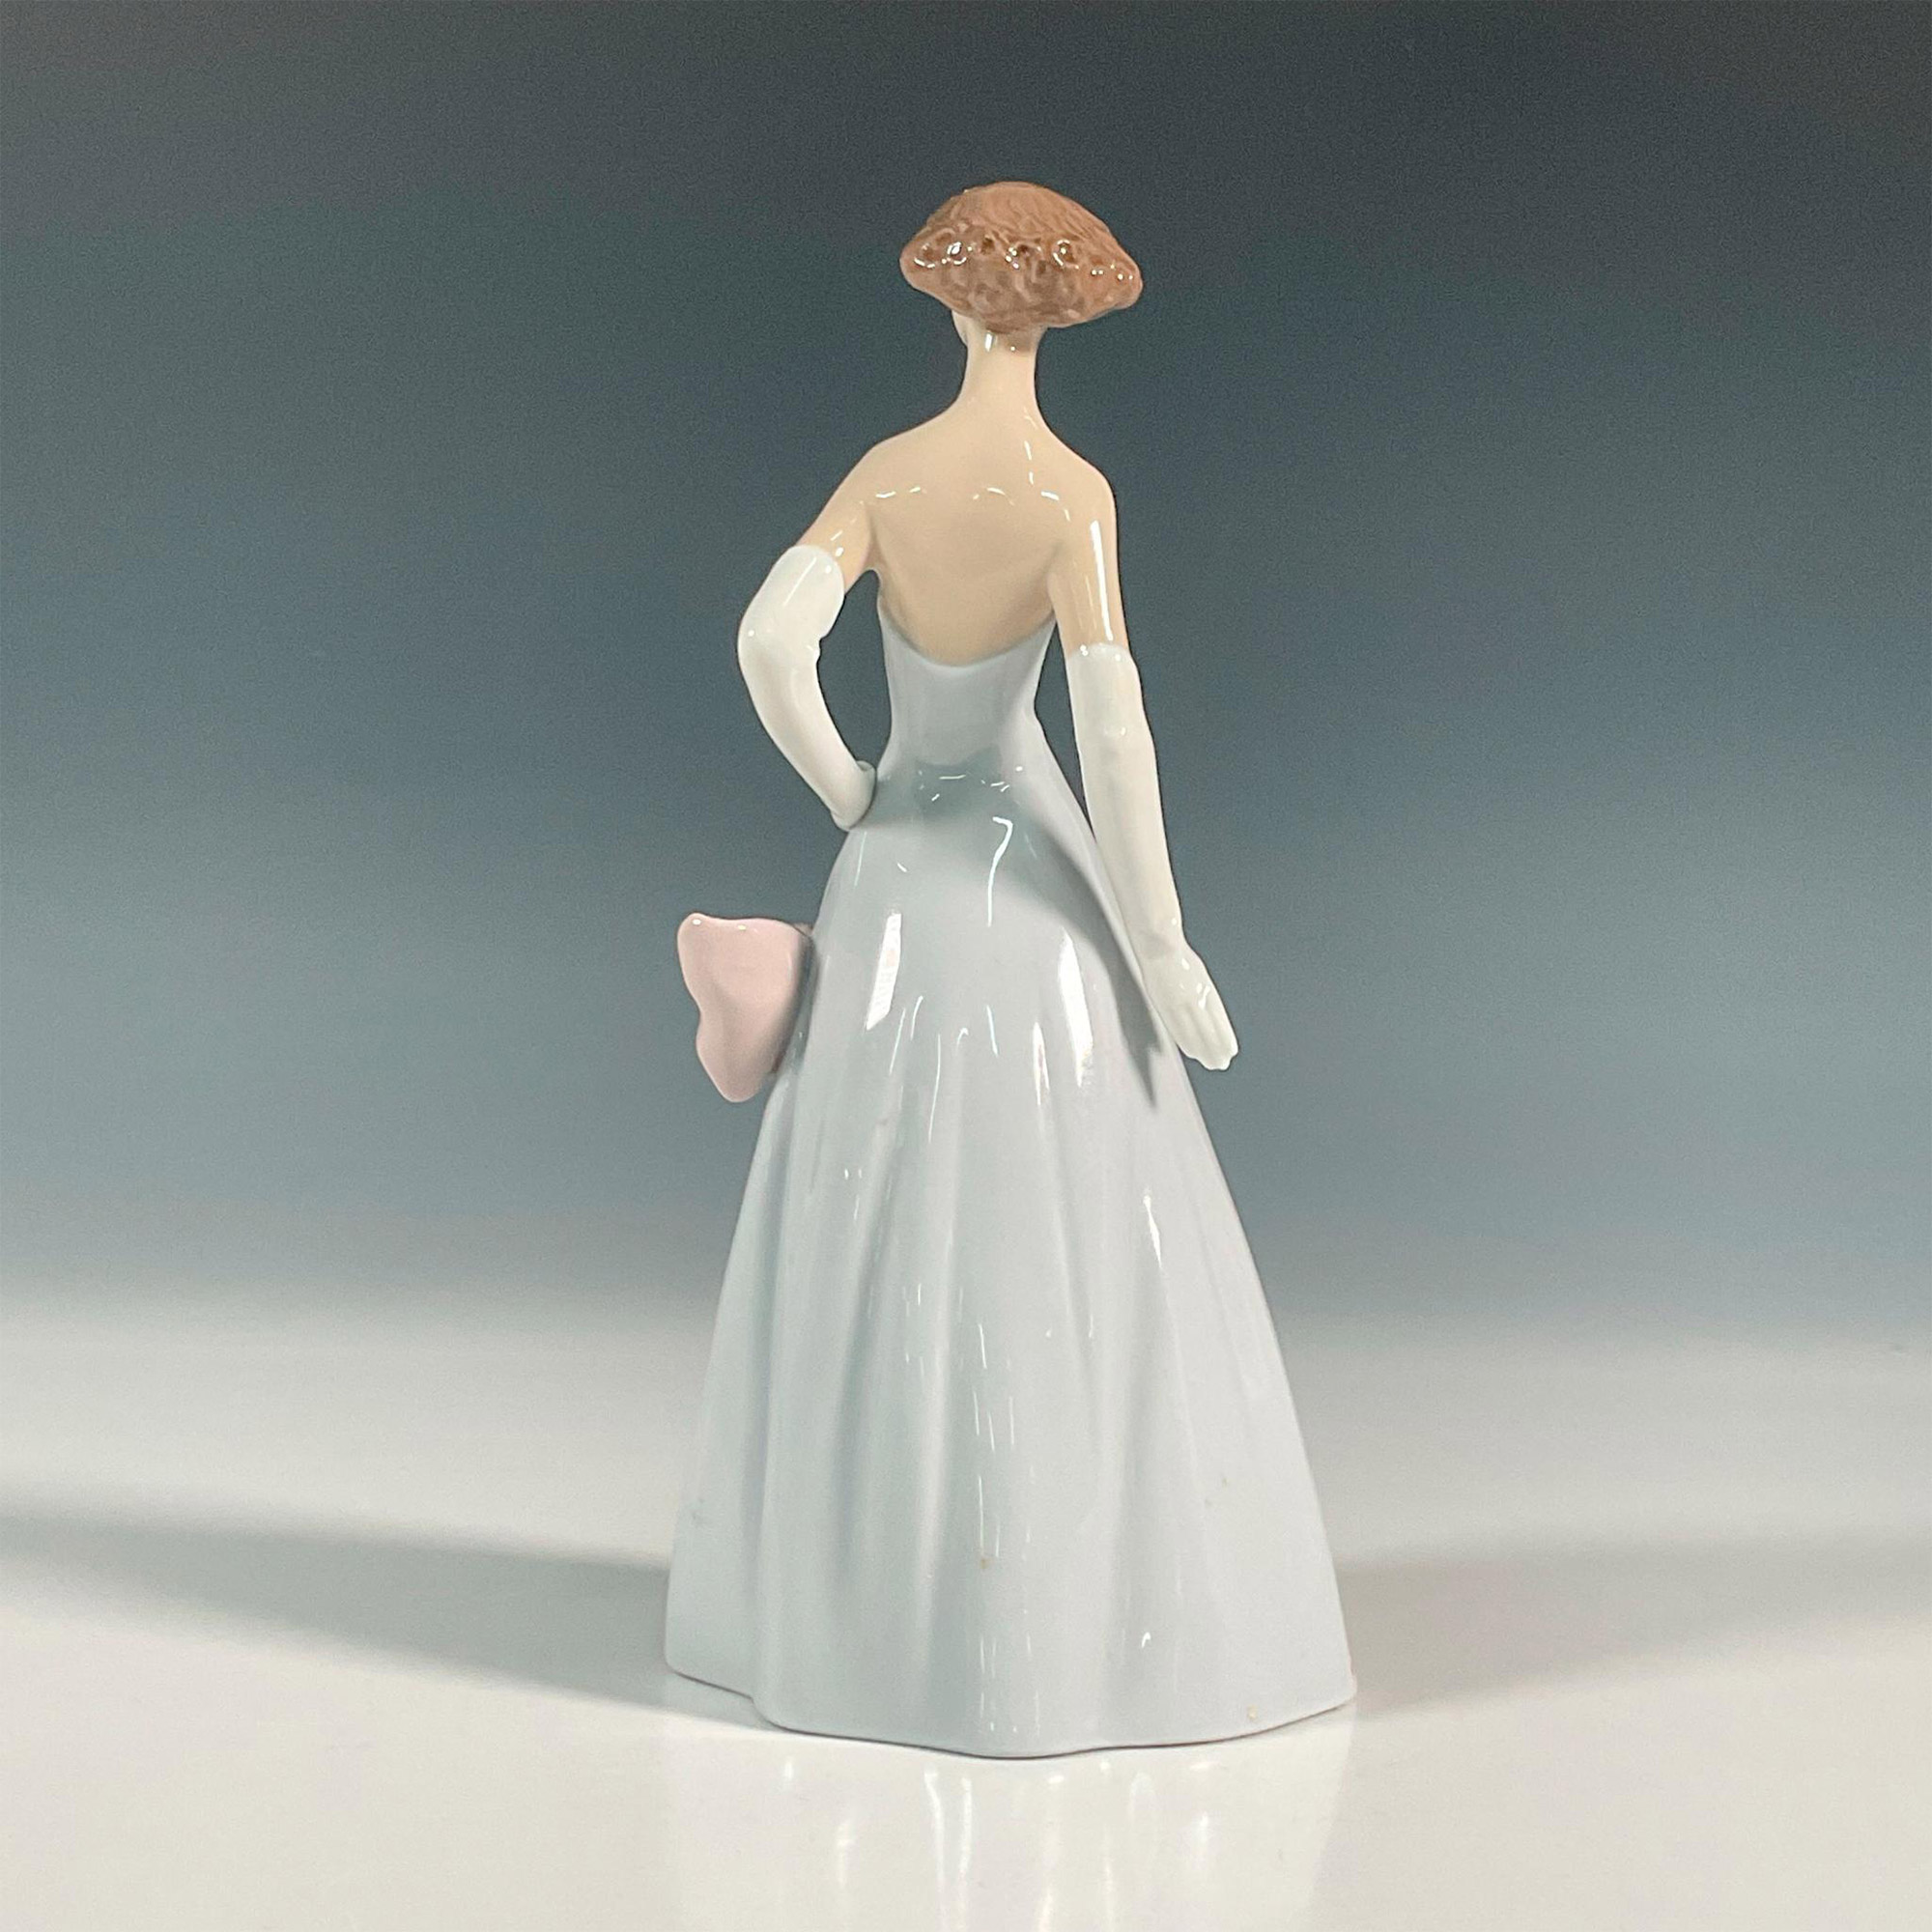 On The Runway 1006595 - Lladro Porcelain Figurine - Image 3 of 5